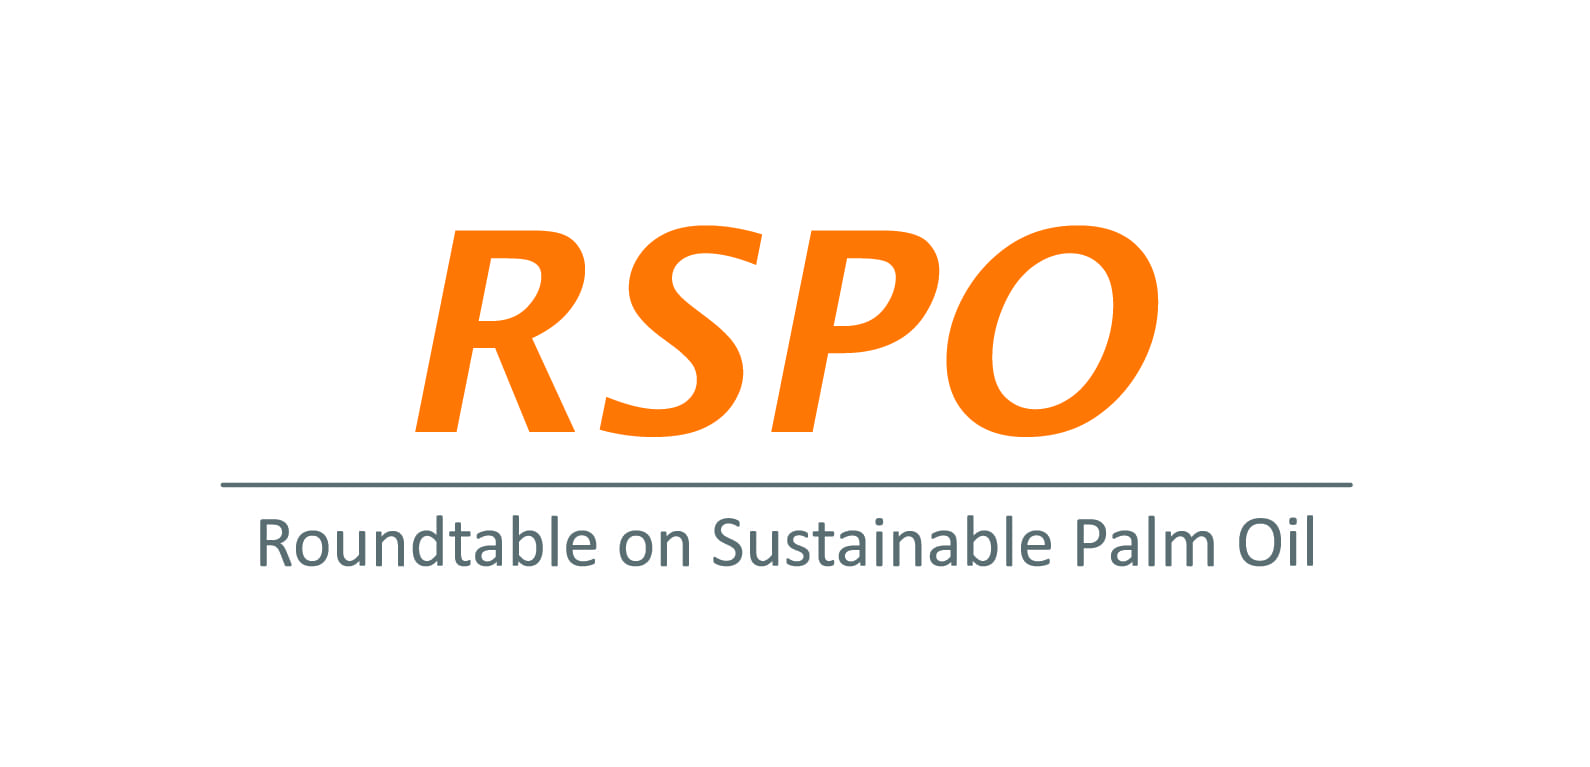 Roundtable on Sustainable Palm Oil – RSPO